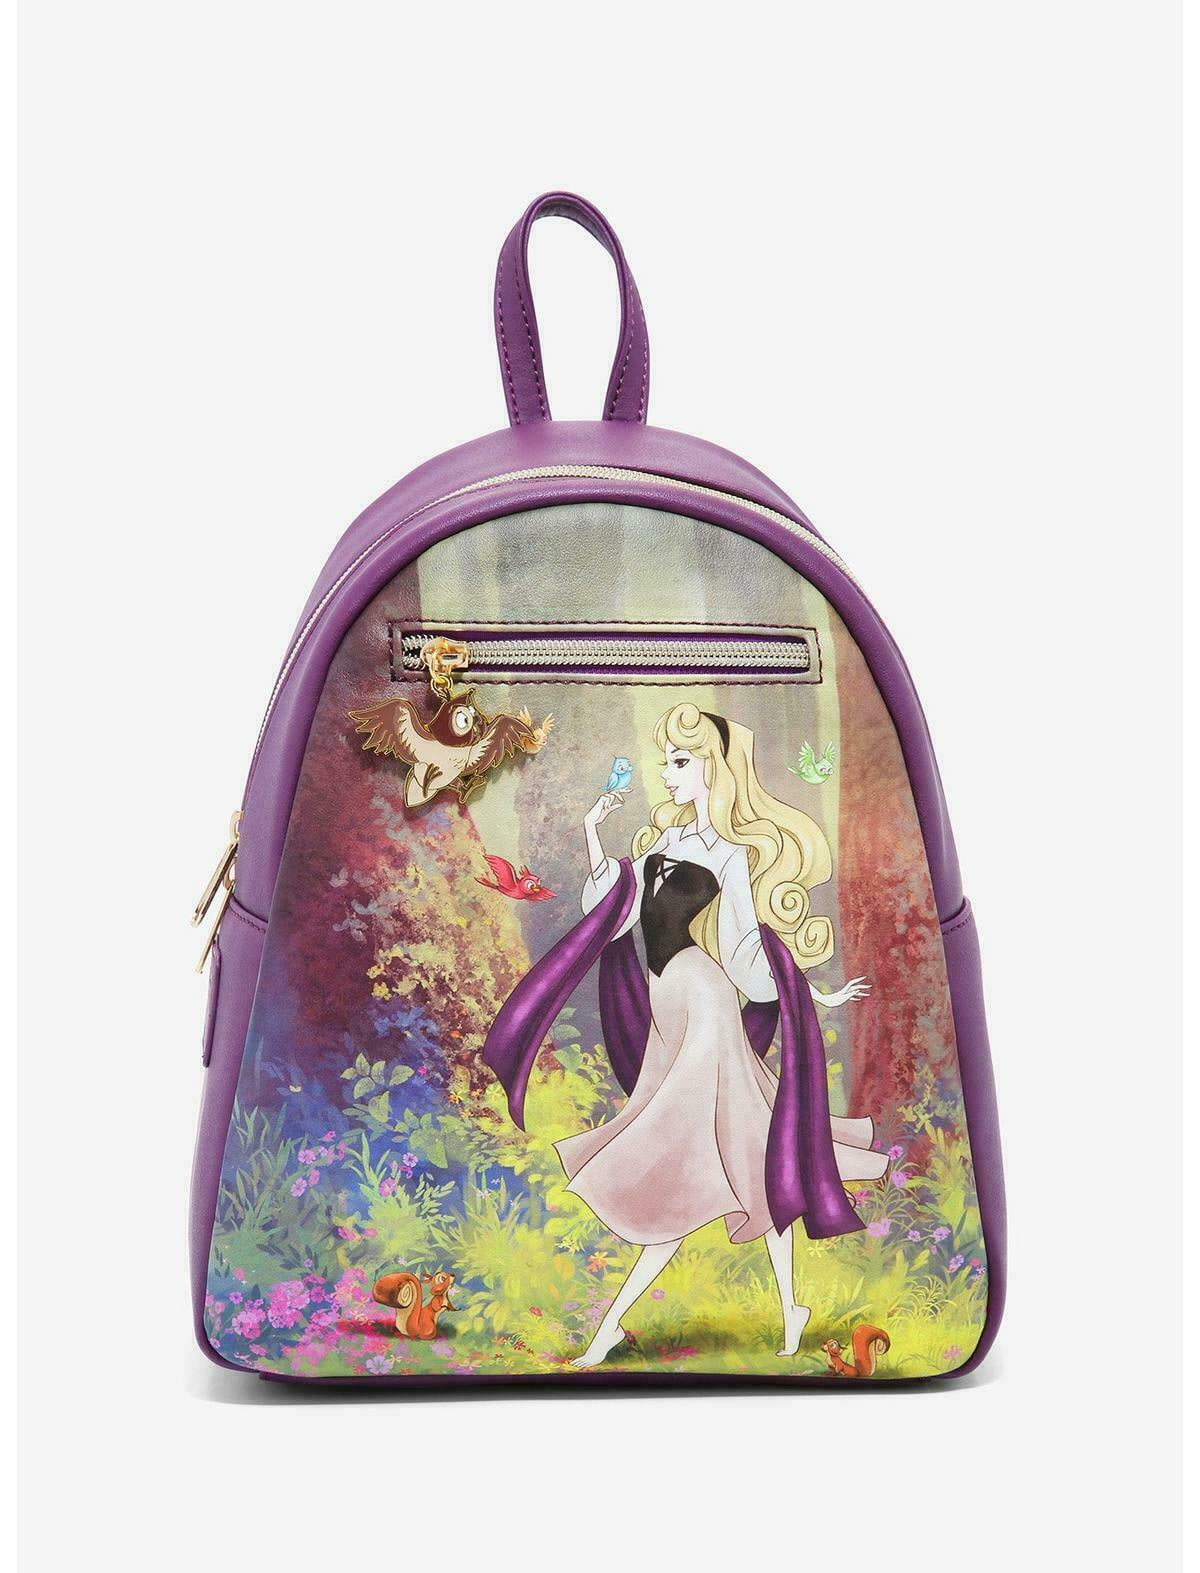 This Sleeping Beauty Loungefly Bag is Once Upon a Dream 